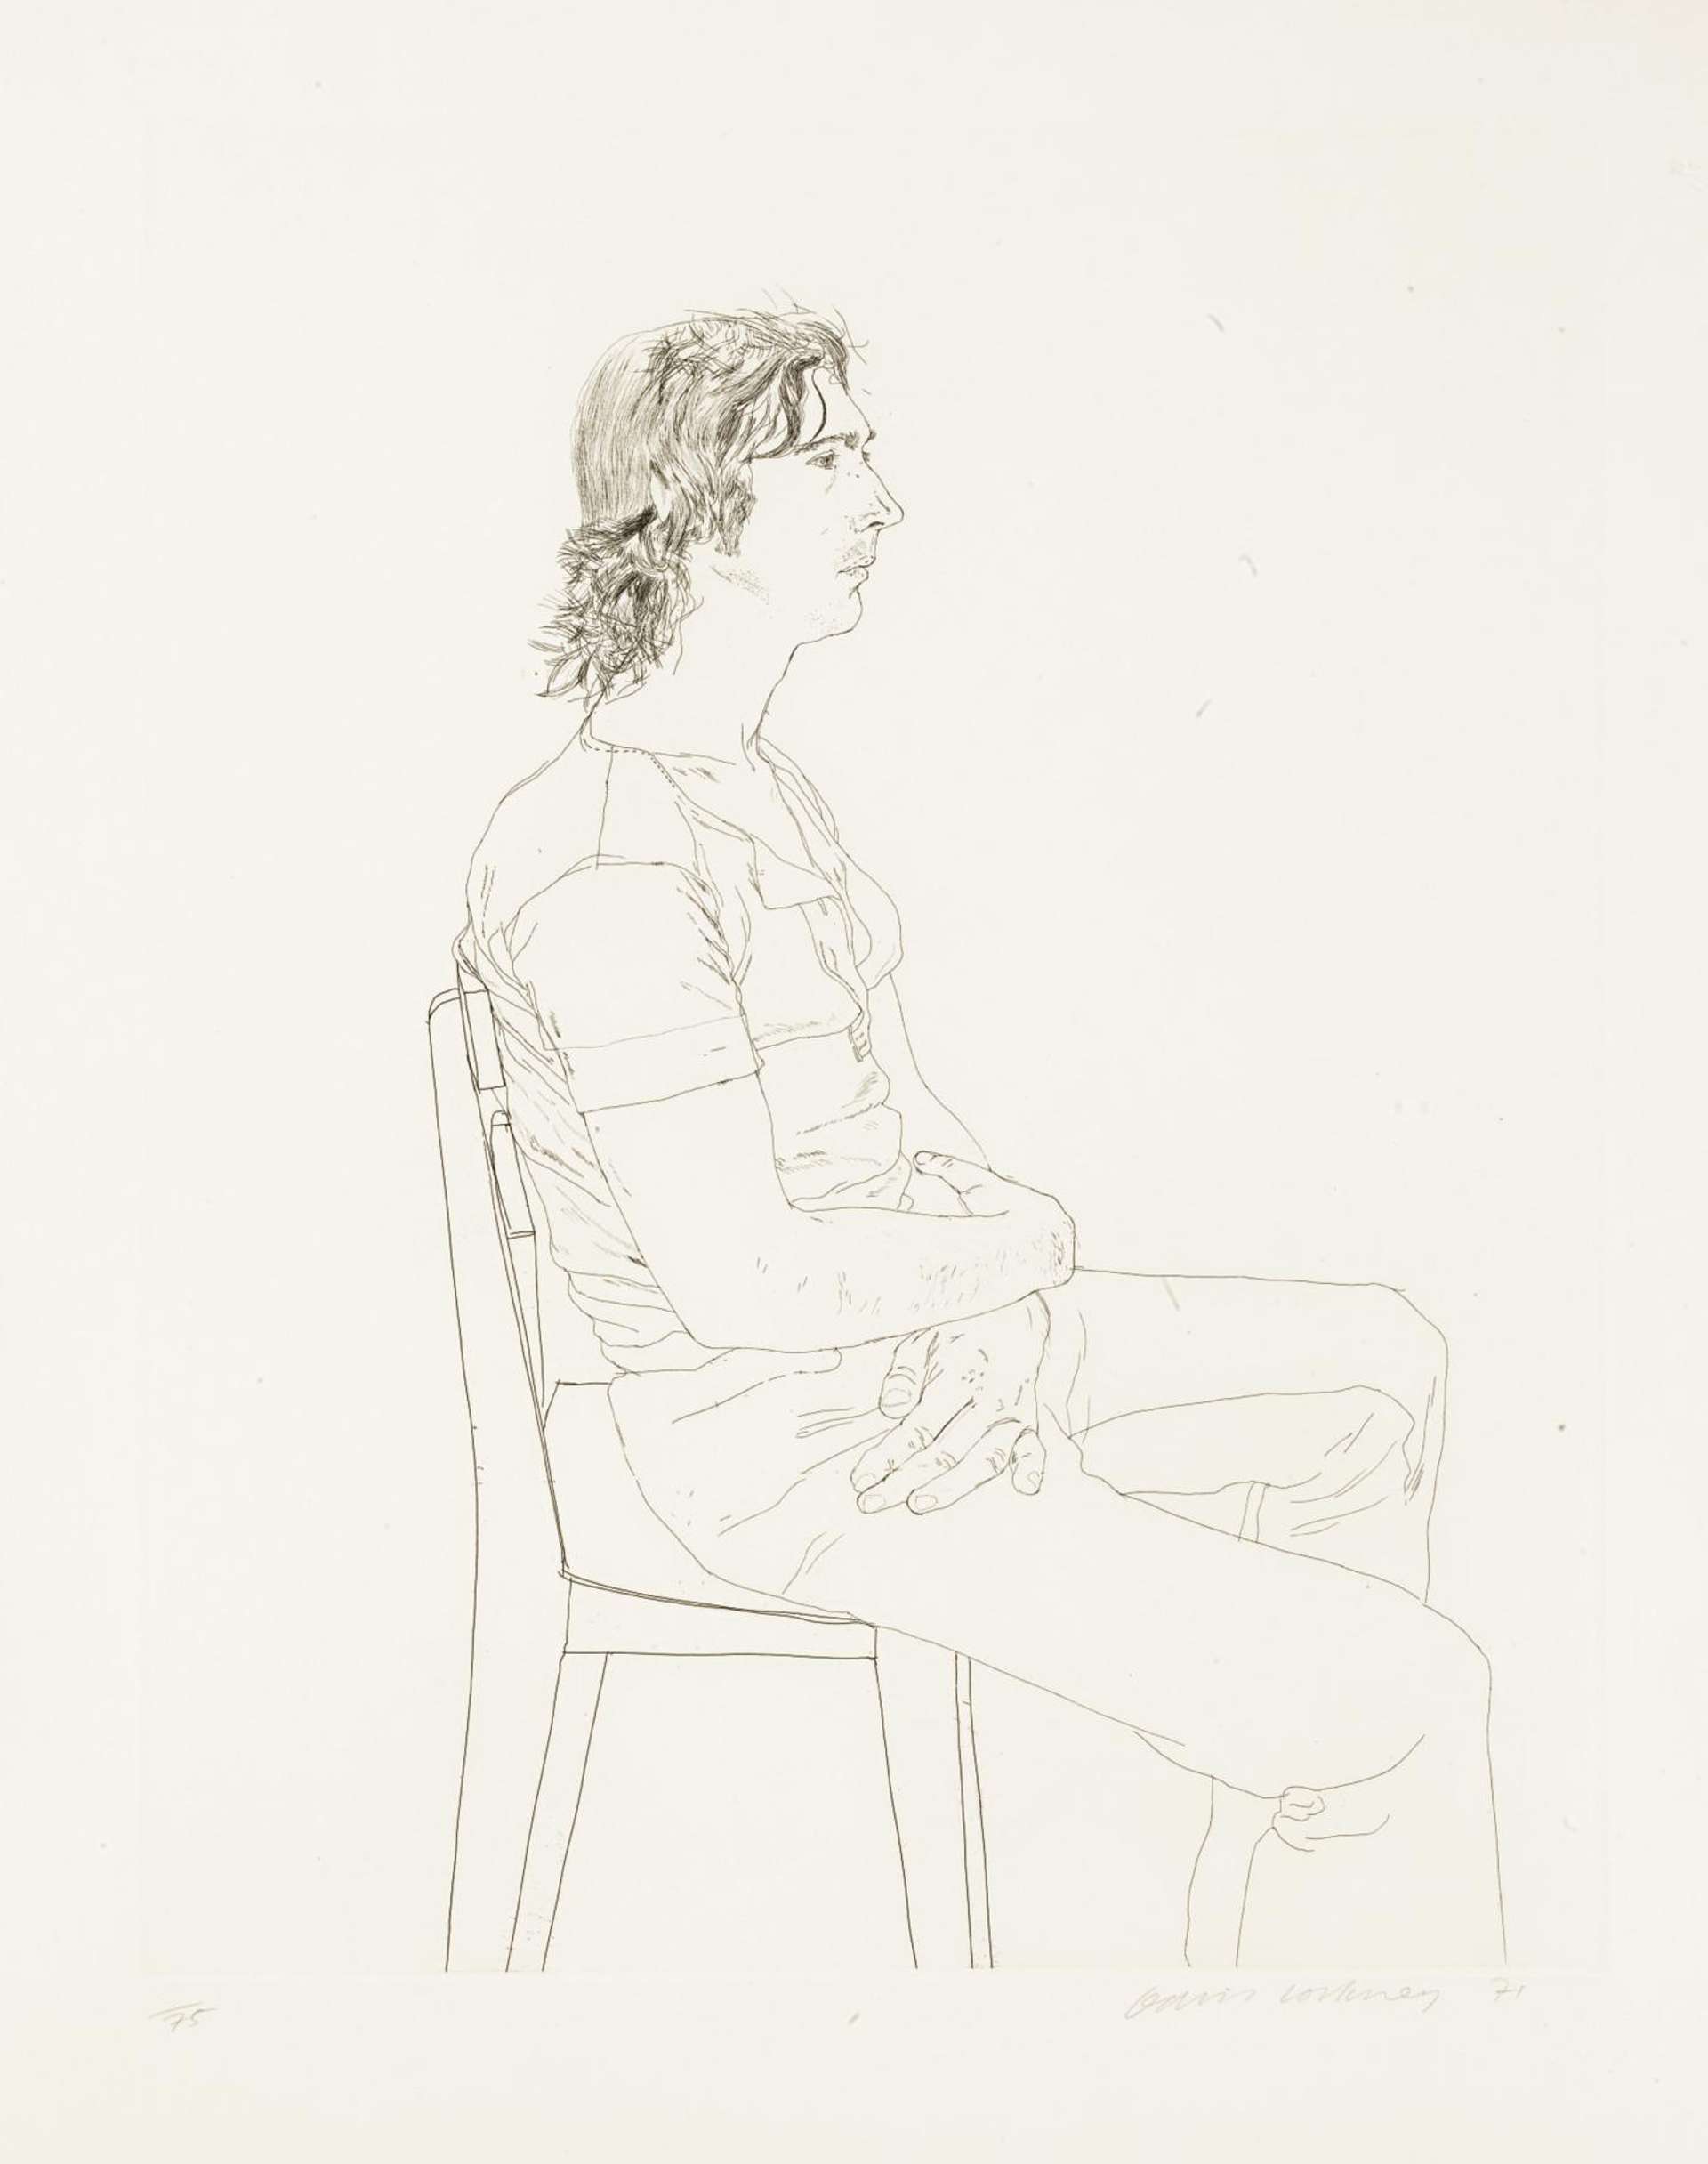 David Hockney’s Maurice Payne. An etching of a man with medium length hair, seated in a chair with his arms crossed over his lap with his legs apart.